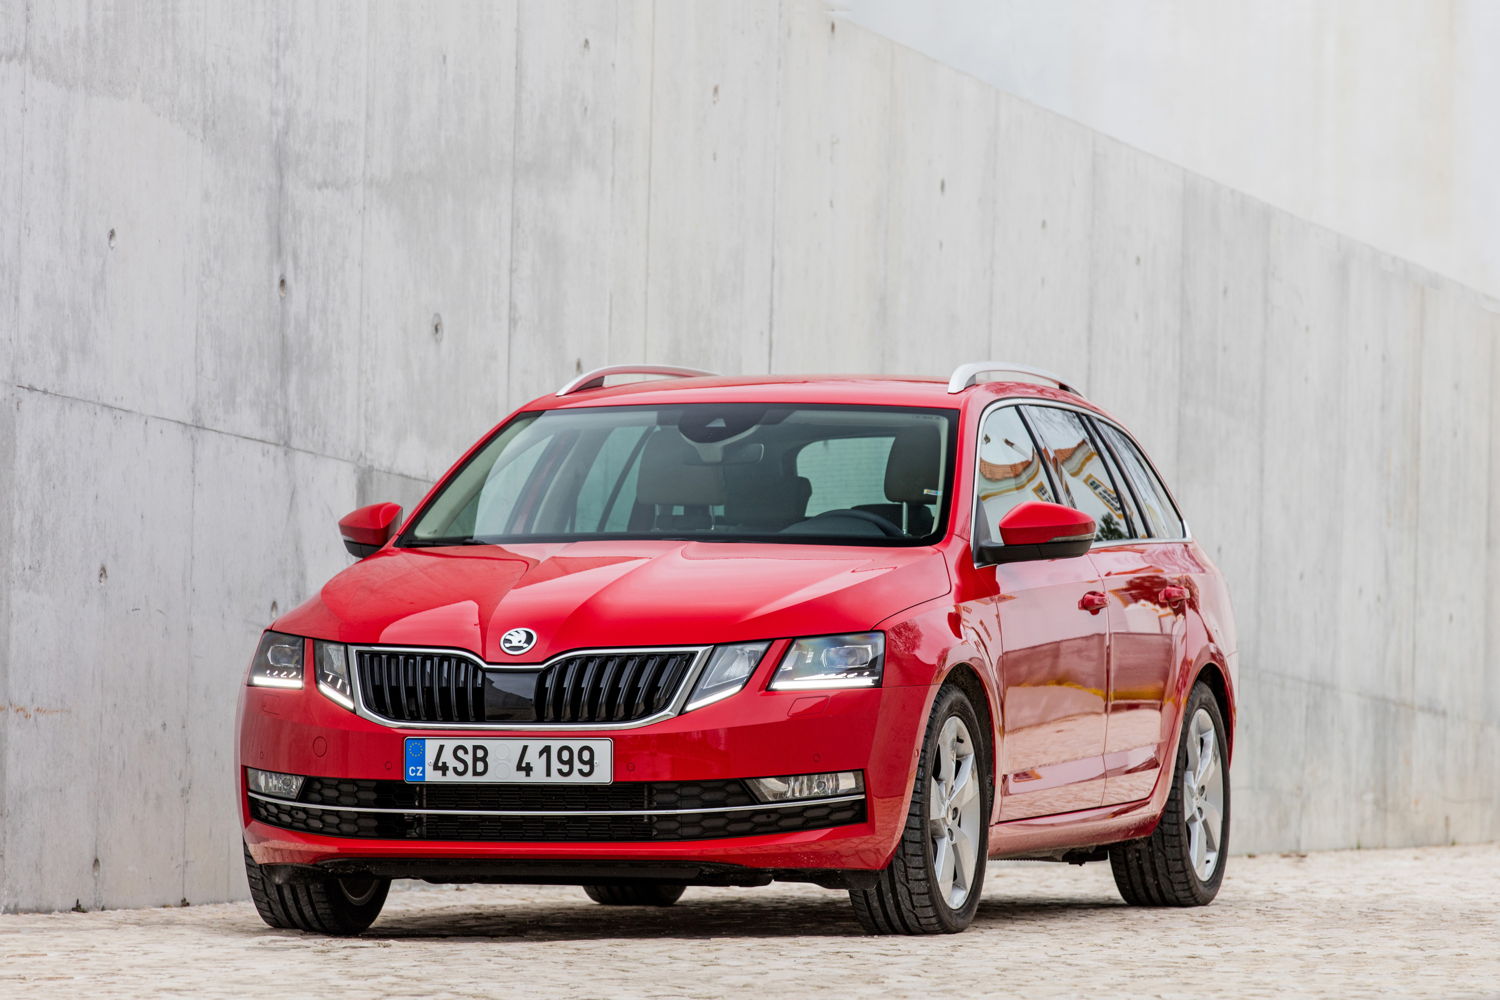 Readers of the German specialist magazine ‘AUTOStraßenverkehr’ and parenting magazine ‘Leben & Erziehen’ voted four ŠKODA models family car of the year. The FABIA COMBI, OCTAVIA COMBI, SUPERB COMBI and YETI were victorious as the best family car across five categories.